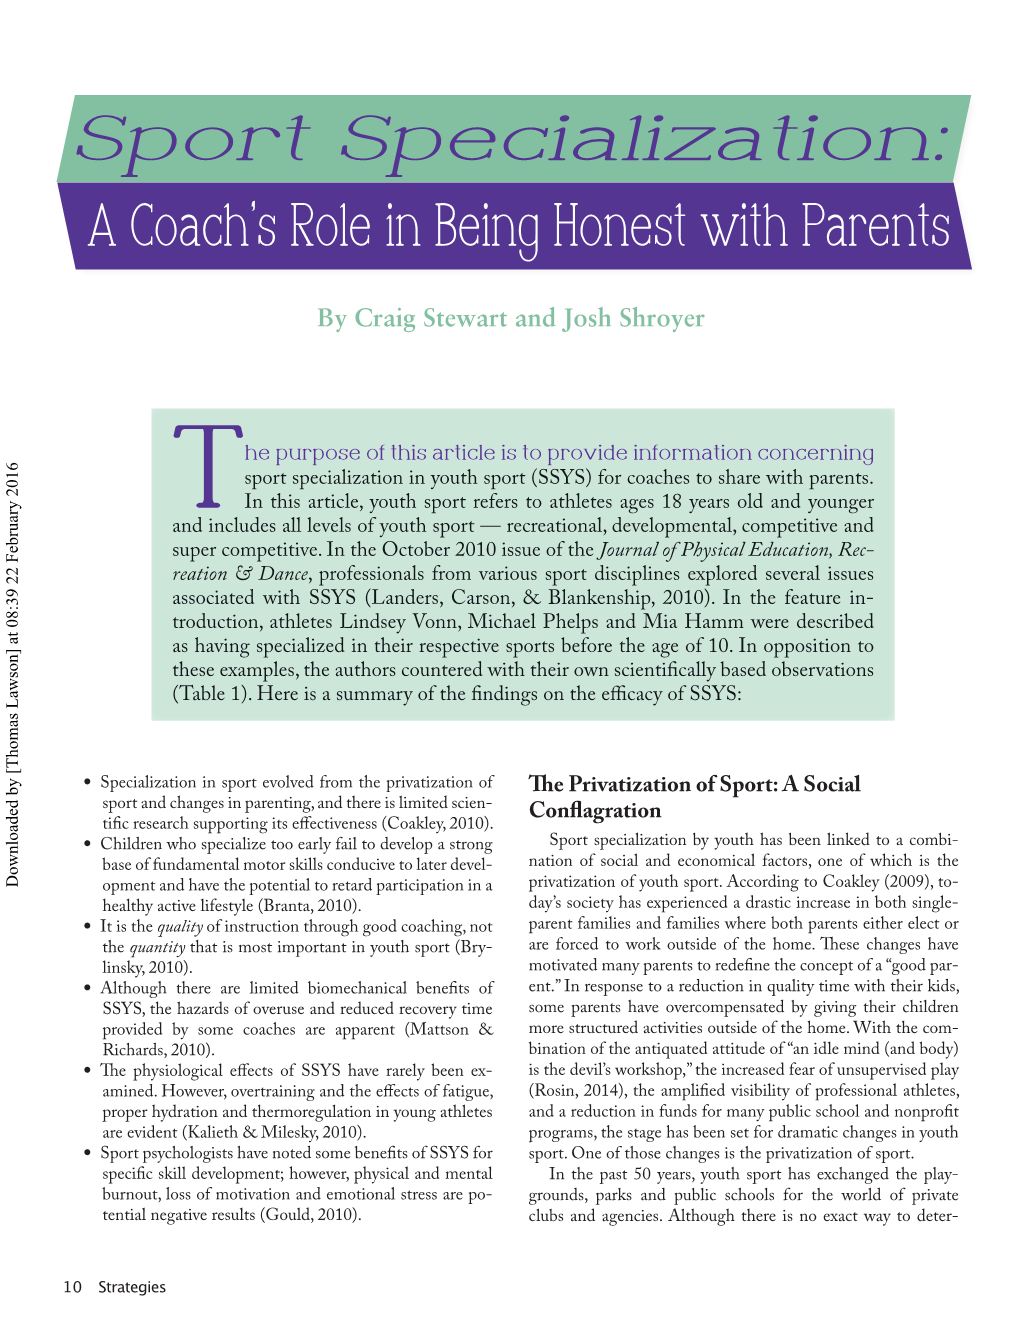 Sport Specialization: a Coach’S Role in Being Honest with Parents